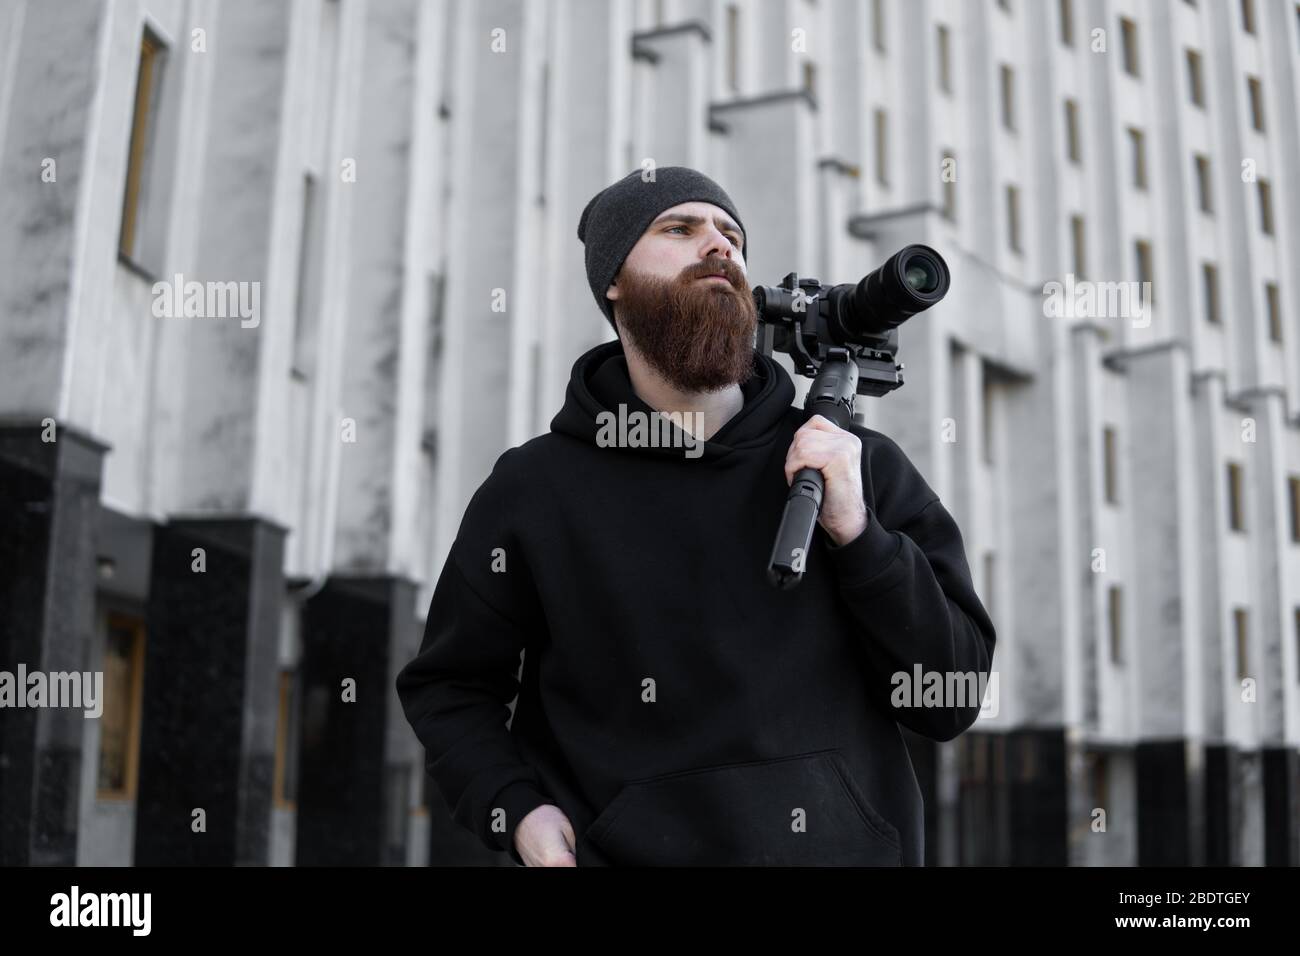 Bearded Professional videographer in black hoodie holding professional camera on 3-axis gimbal stabilizer. Filmmaker making a great video with a Stock Photo